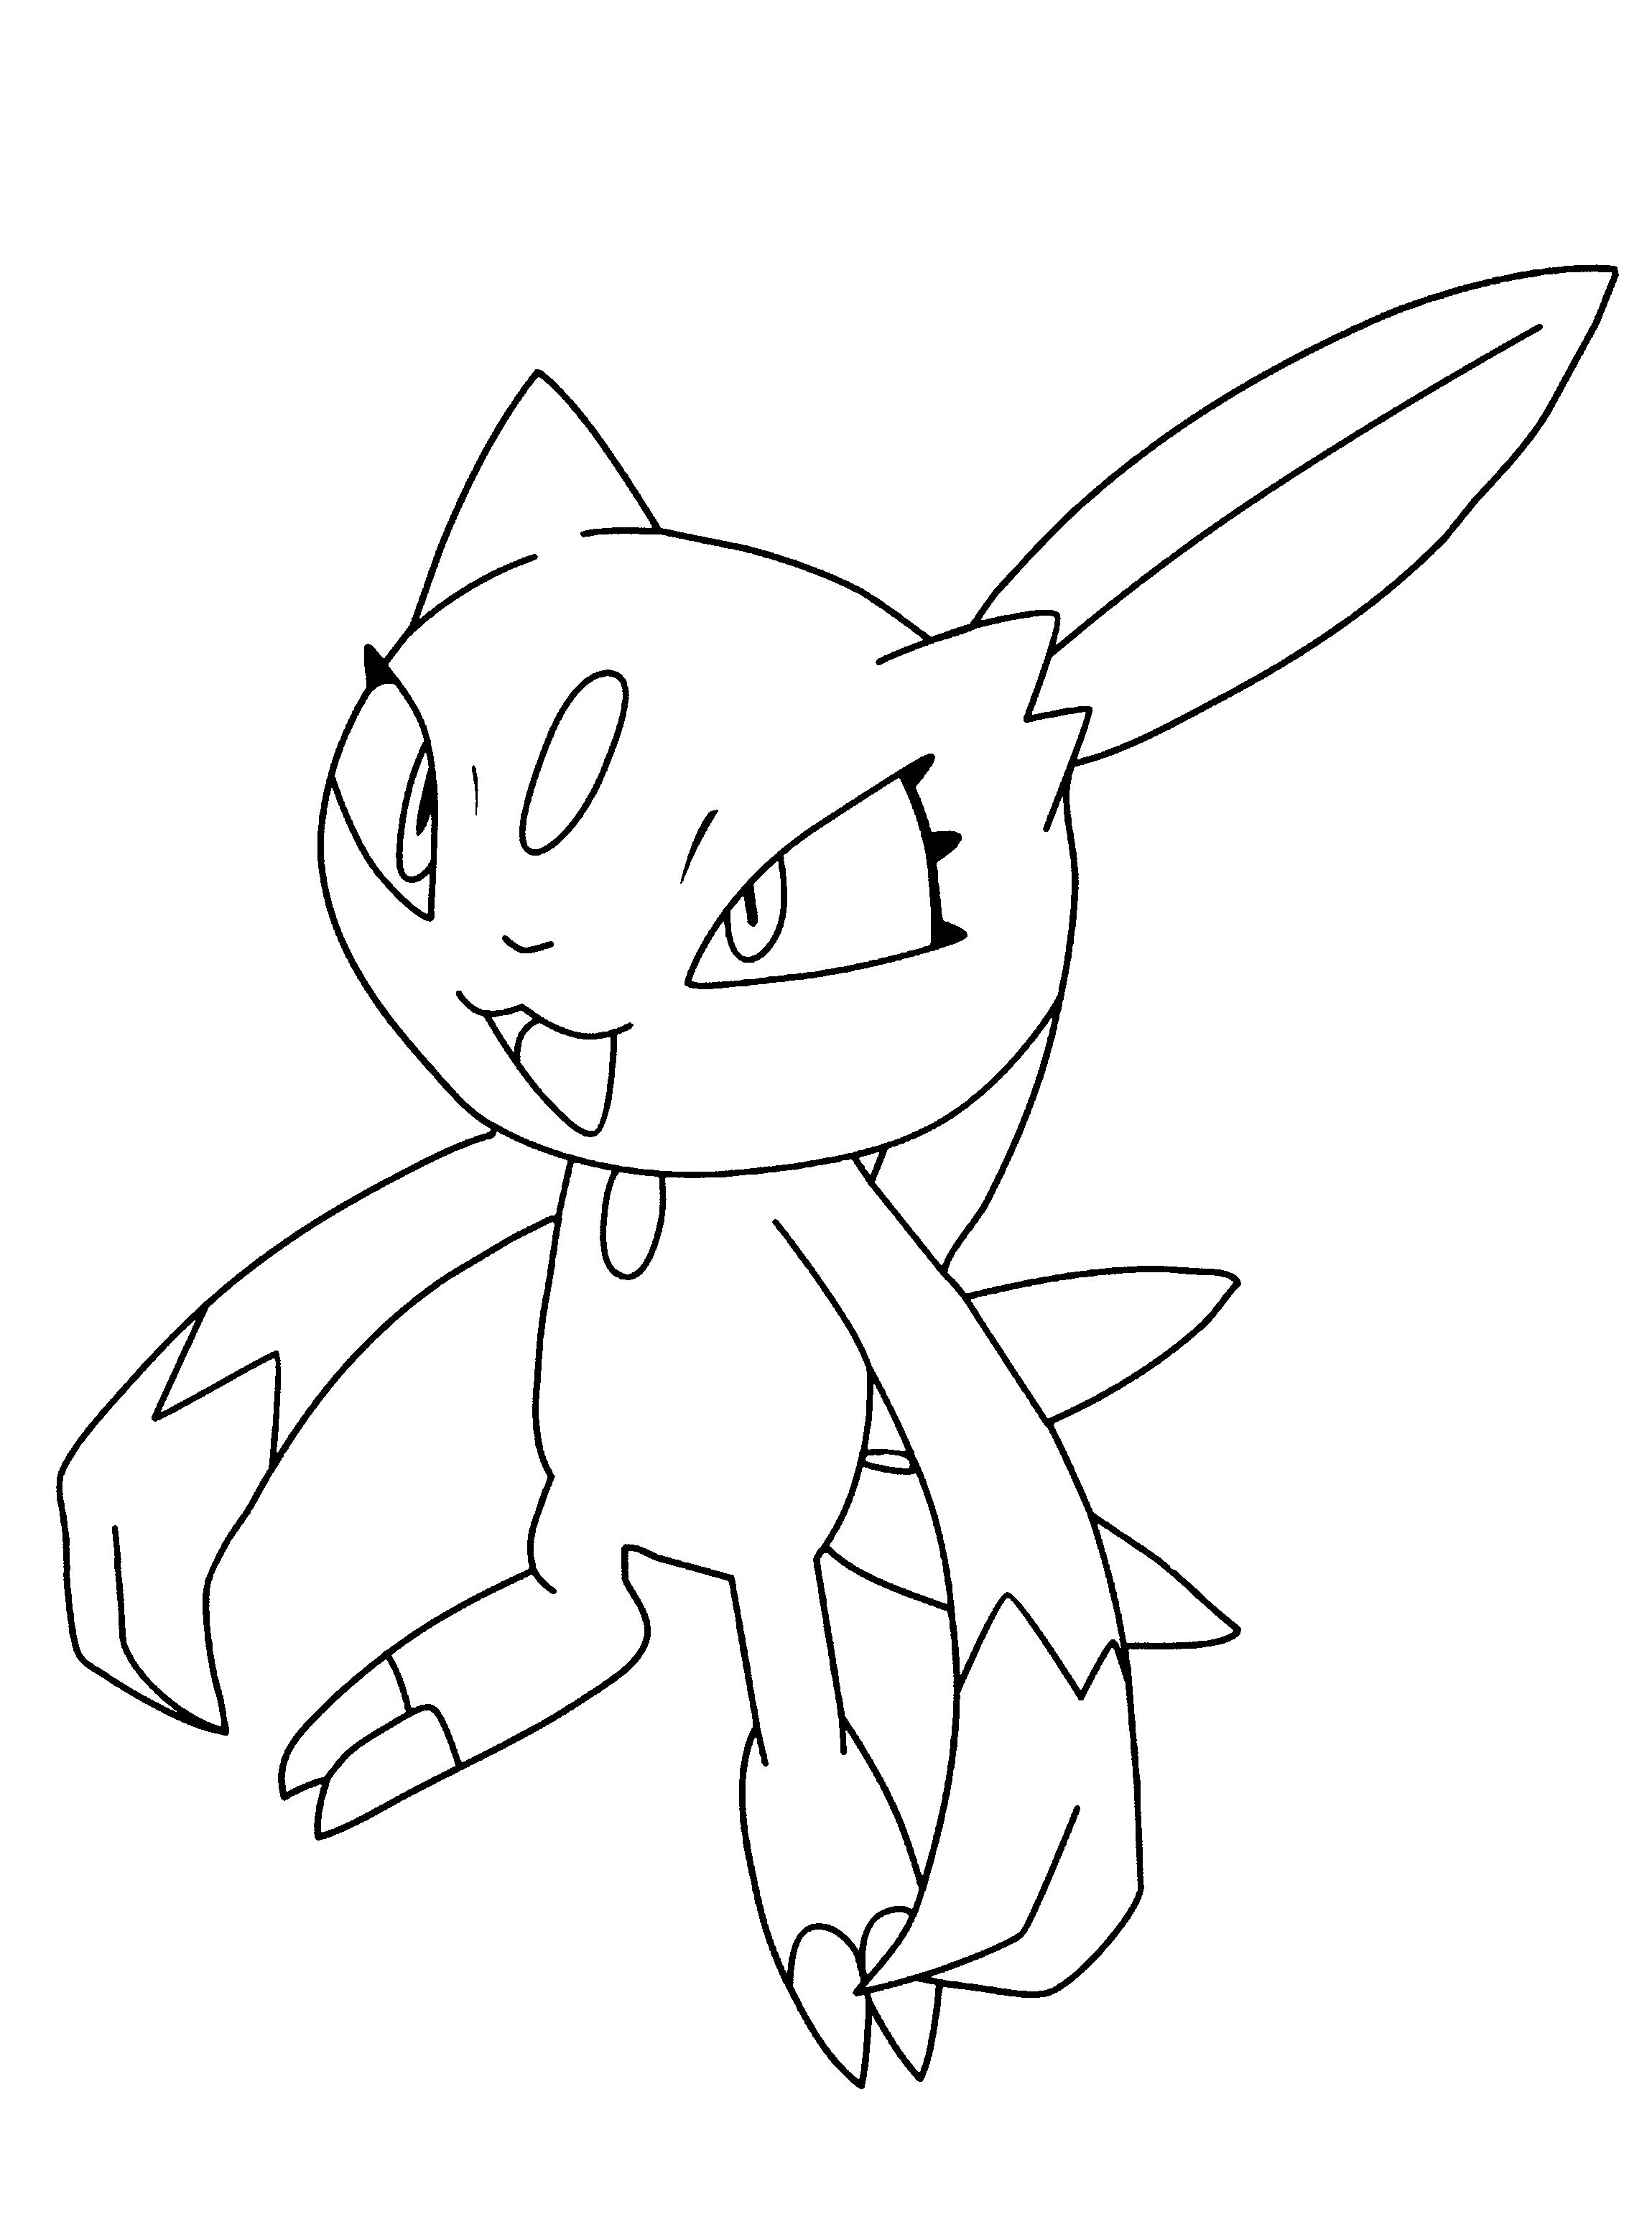 animated-coloring-pages-pokemon-image-0121